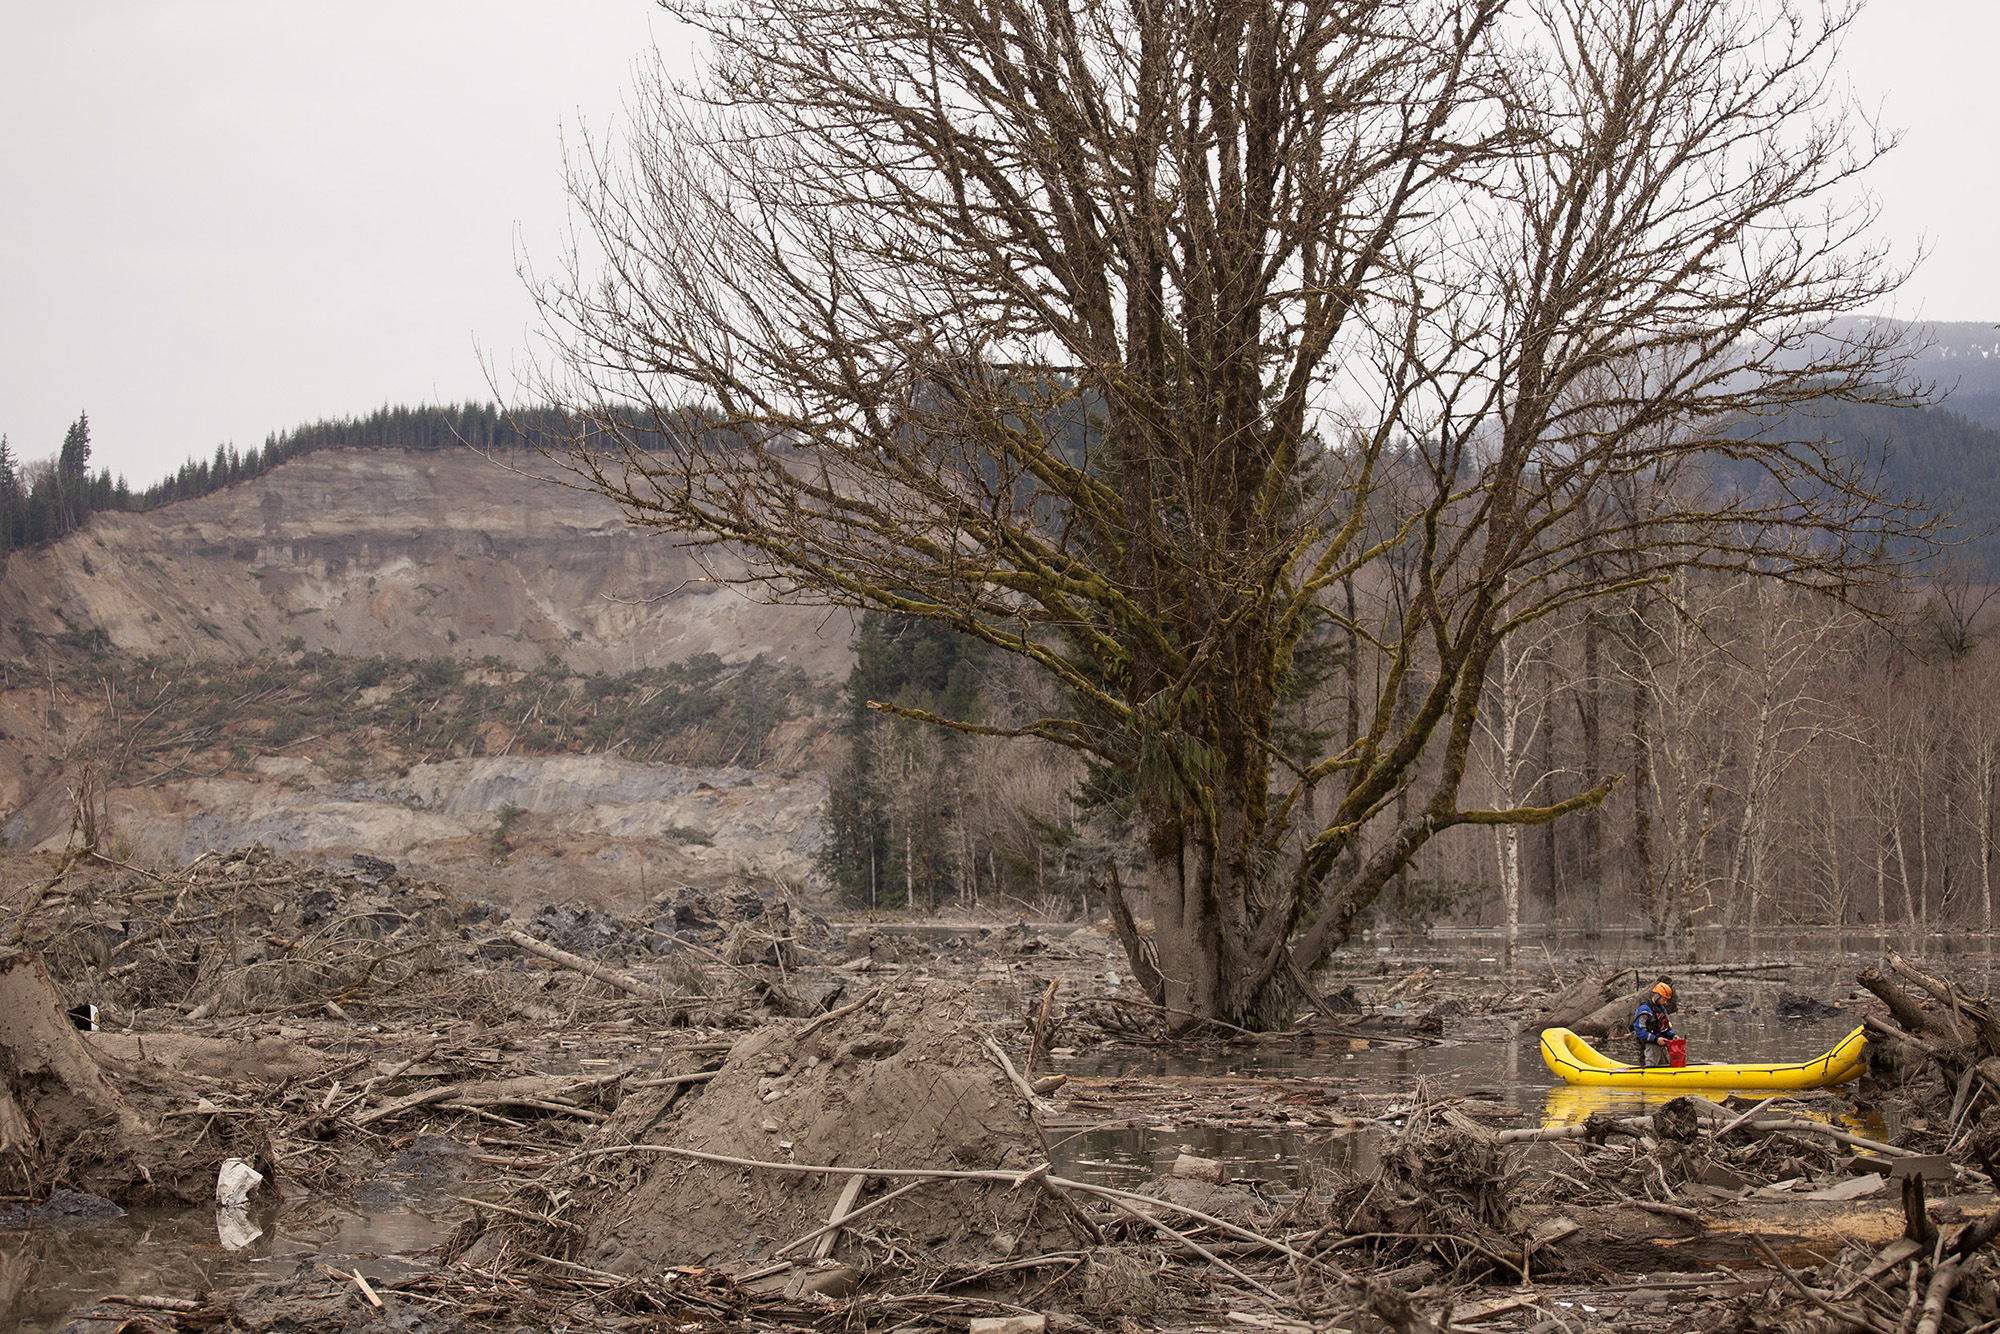 A man in a search-and-rescue boat floats through the debris field after a deadly mudslide near Oso, Washington, on March 25, 2014.